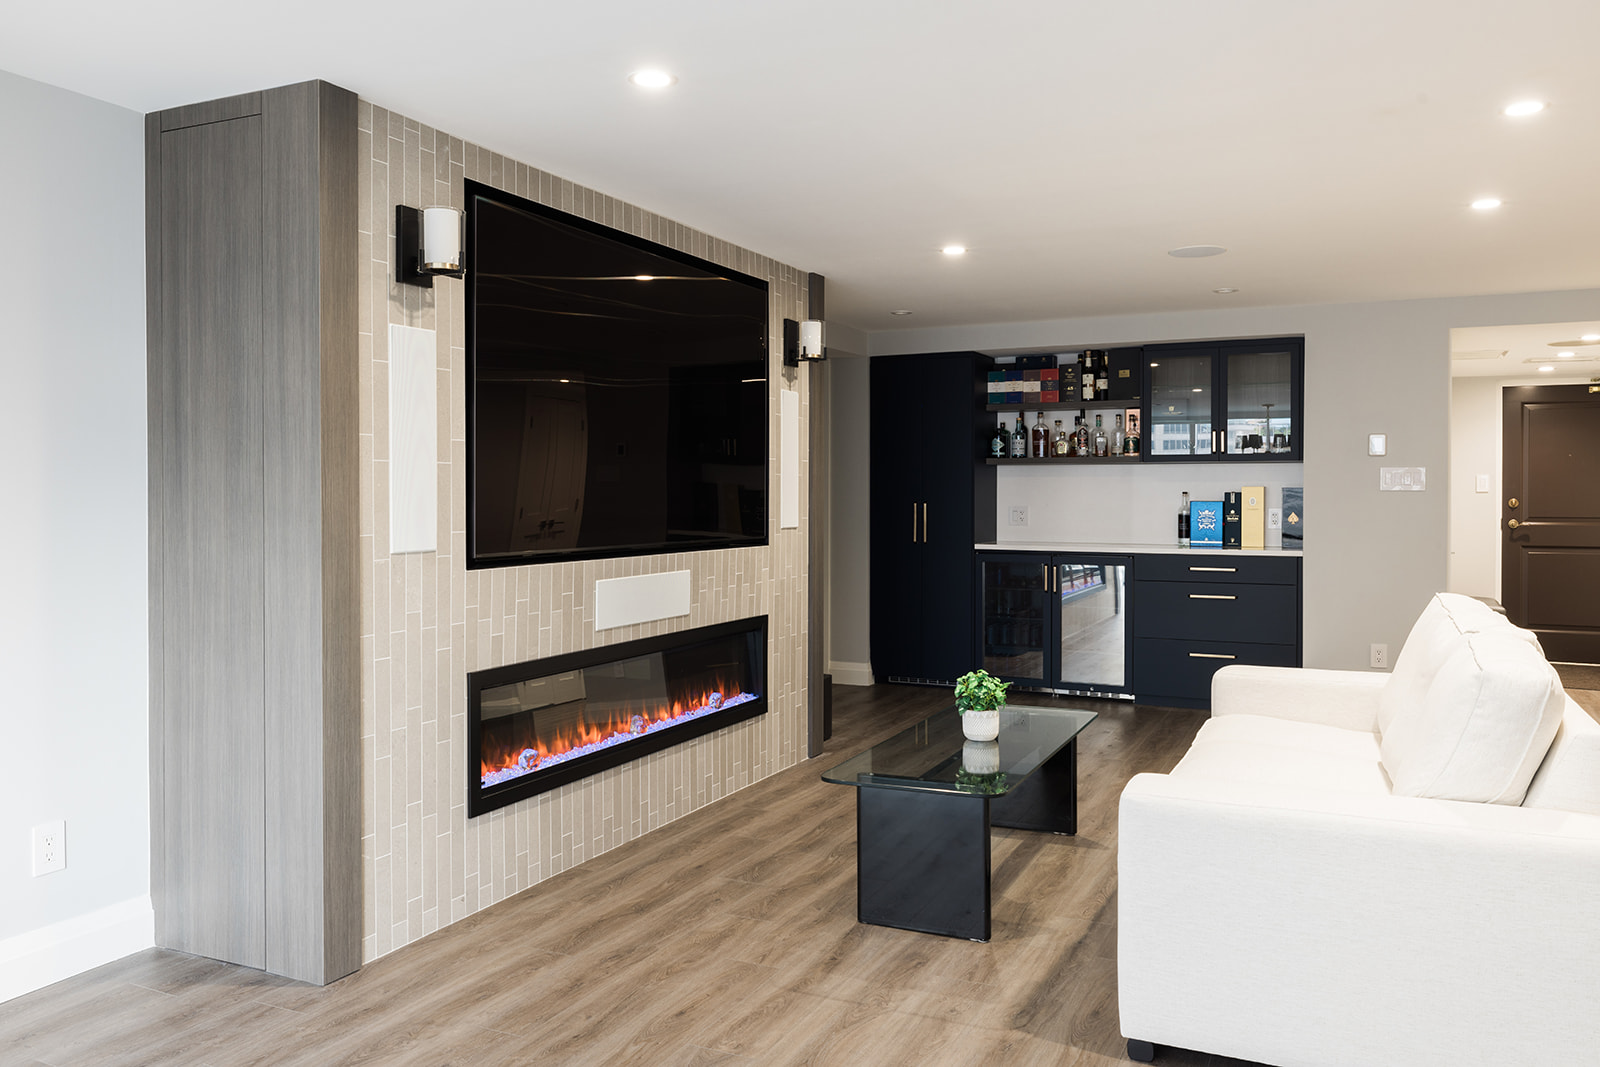 View of custom fireplace with mounted TV above in living room in downtown Toronto condo renovation with view of beverage station 